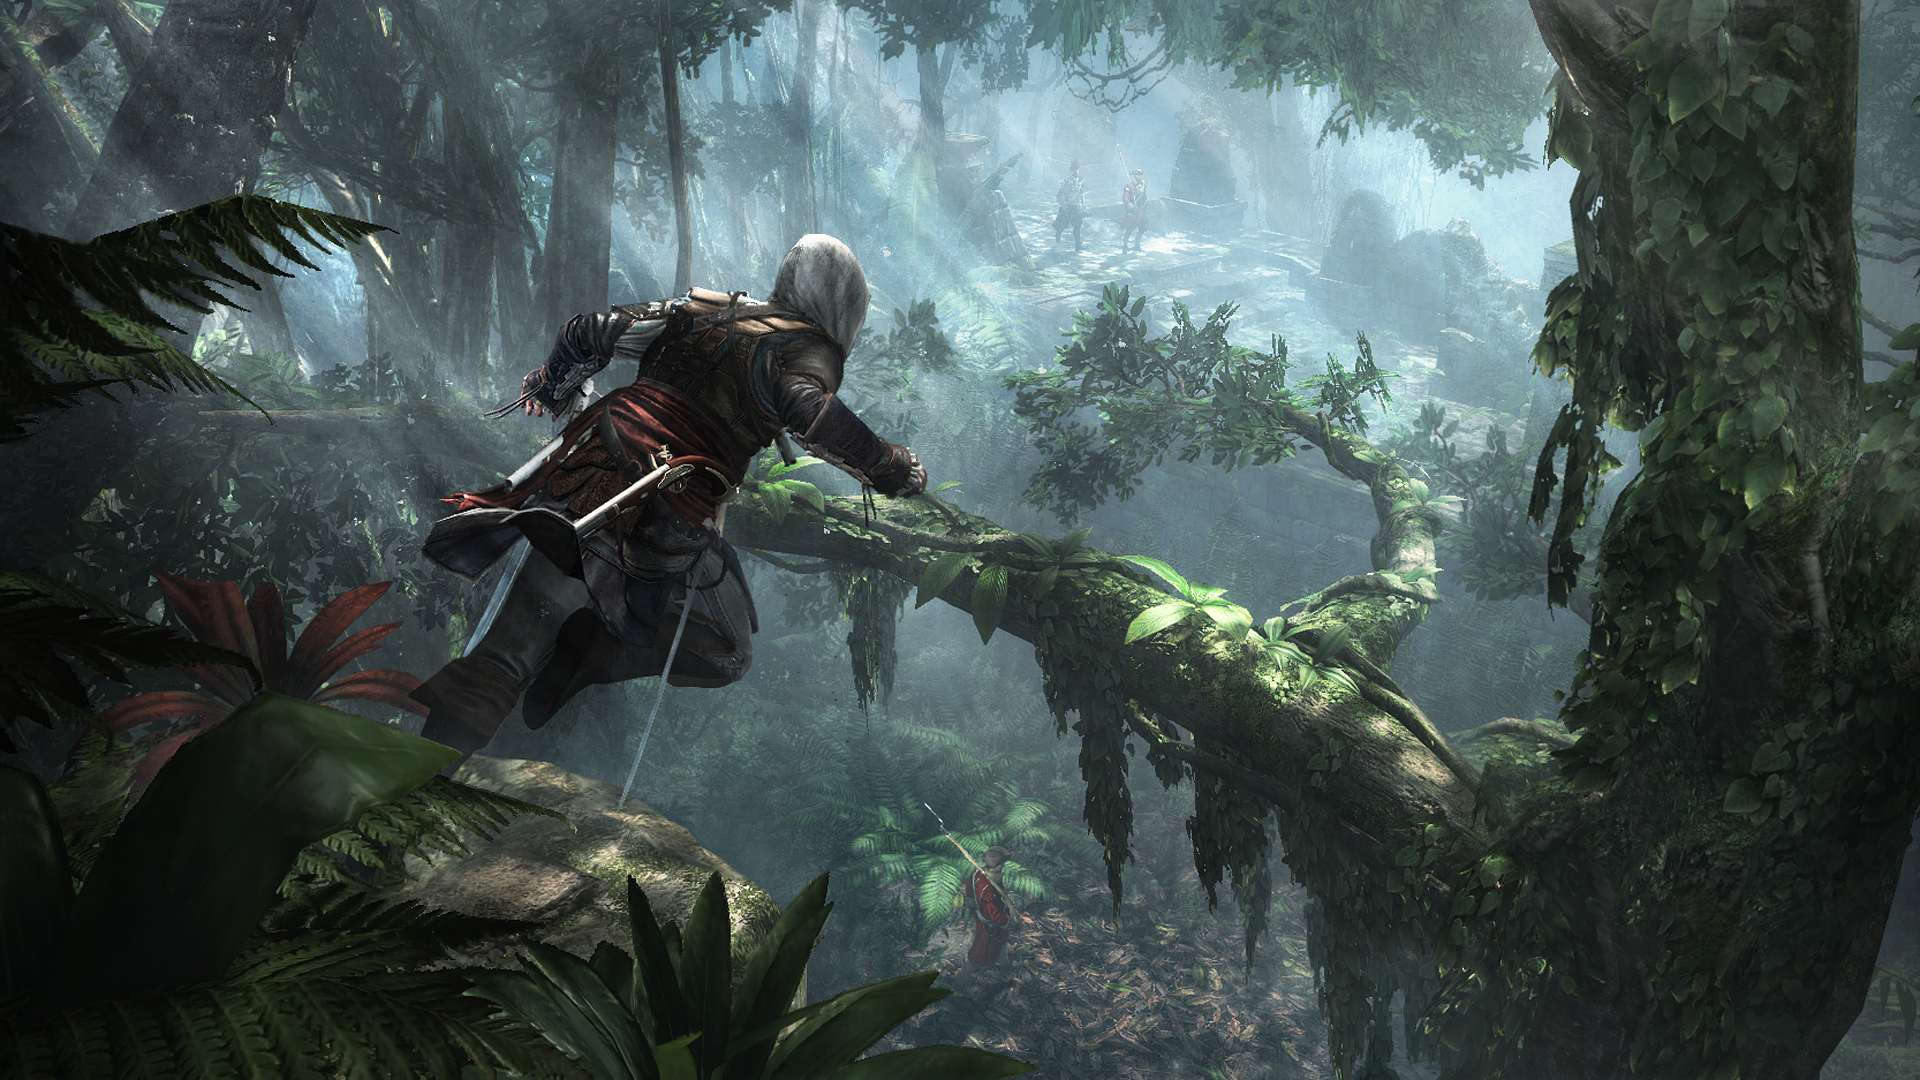 GOTY 2013 Game of the Year – Assassin's Creed 4: Black Flag